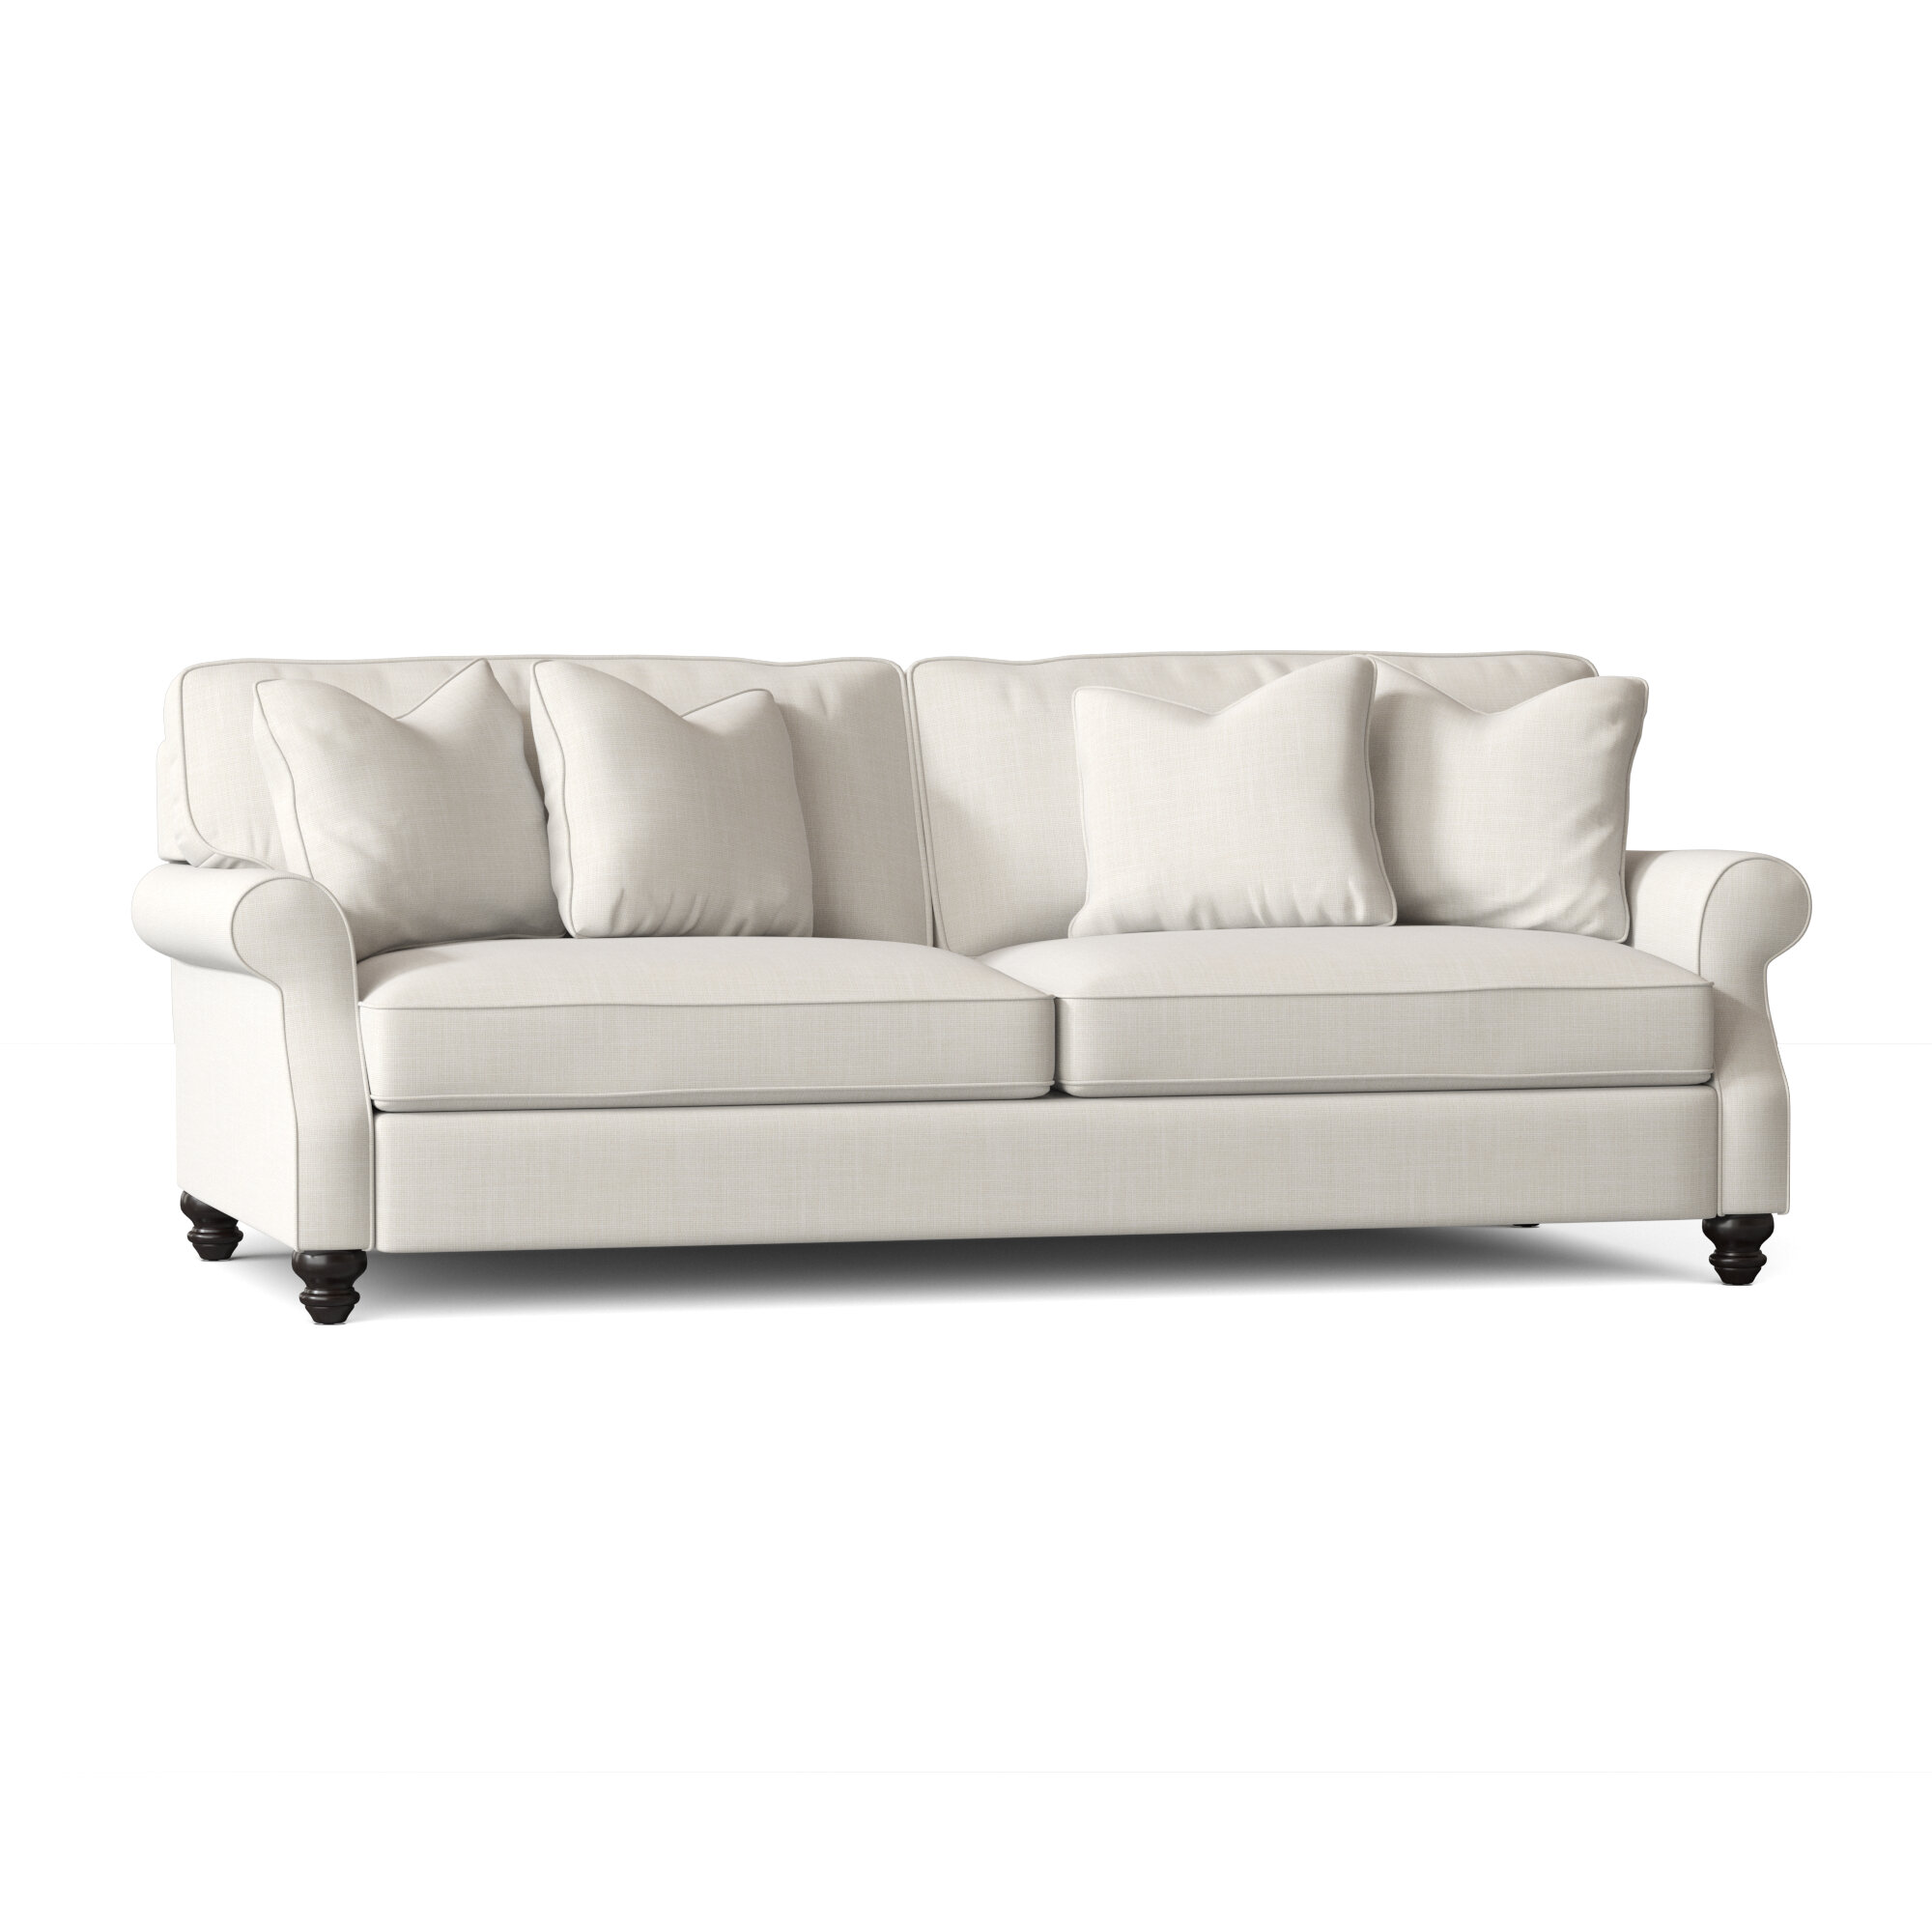 Woburn 85” Rolled Arm Sofa with Reversible Cushions